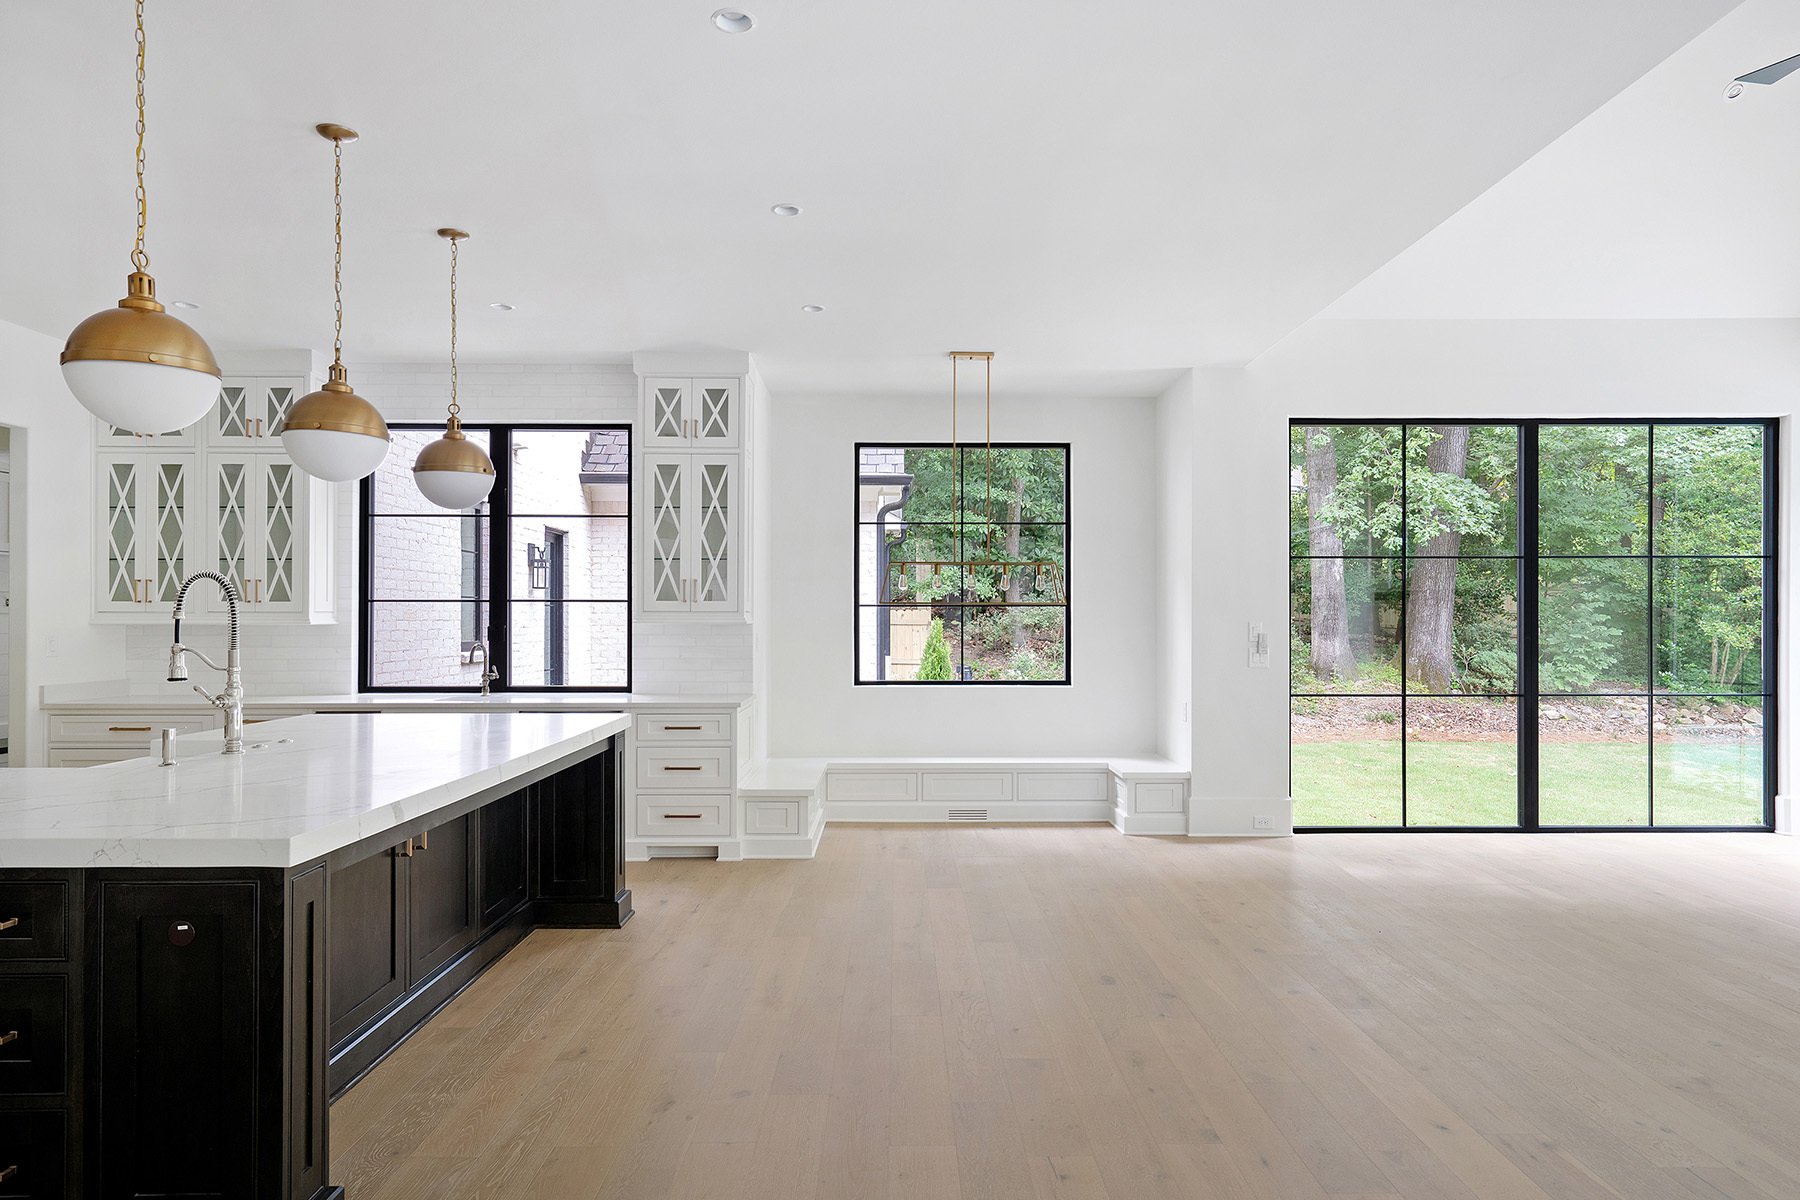 Inside view of a home with thin black frame windows. Black kitchen island.